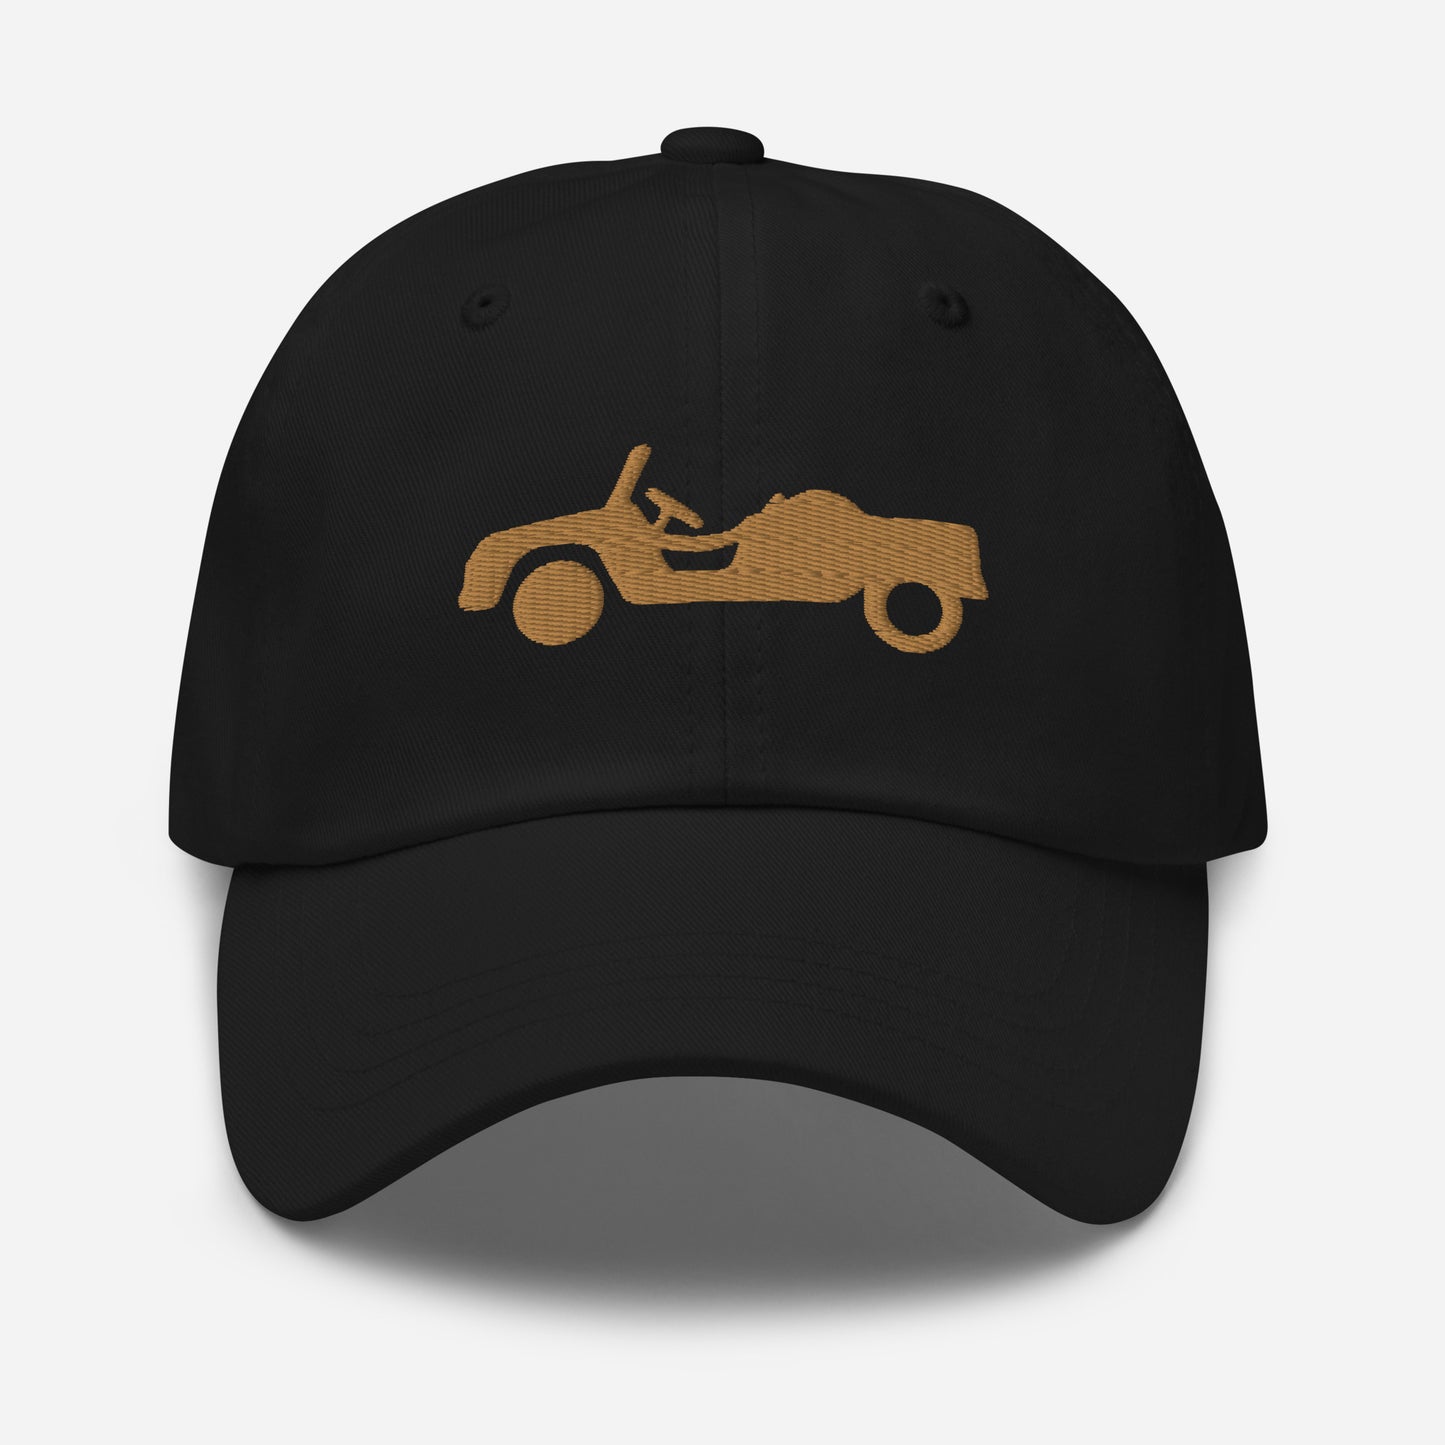 3D Puff front and back beige embroidered cap Citroën Méhari HOGGAR - Black, Beige and White